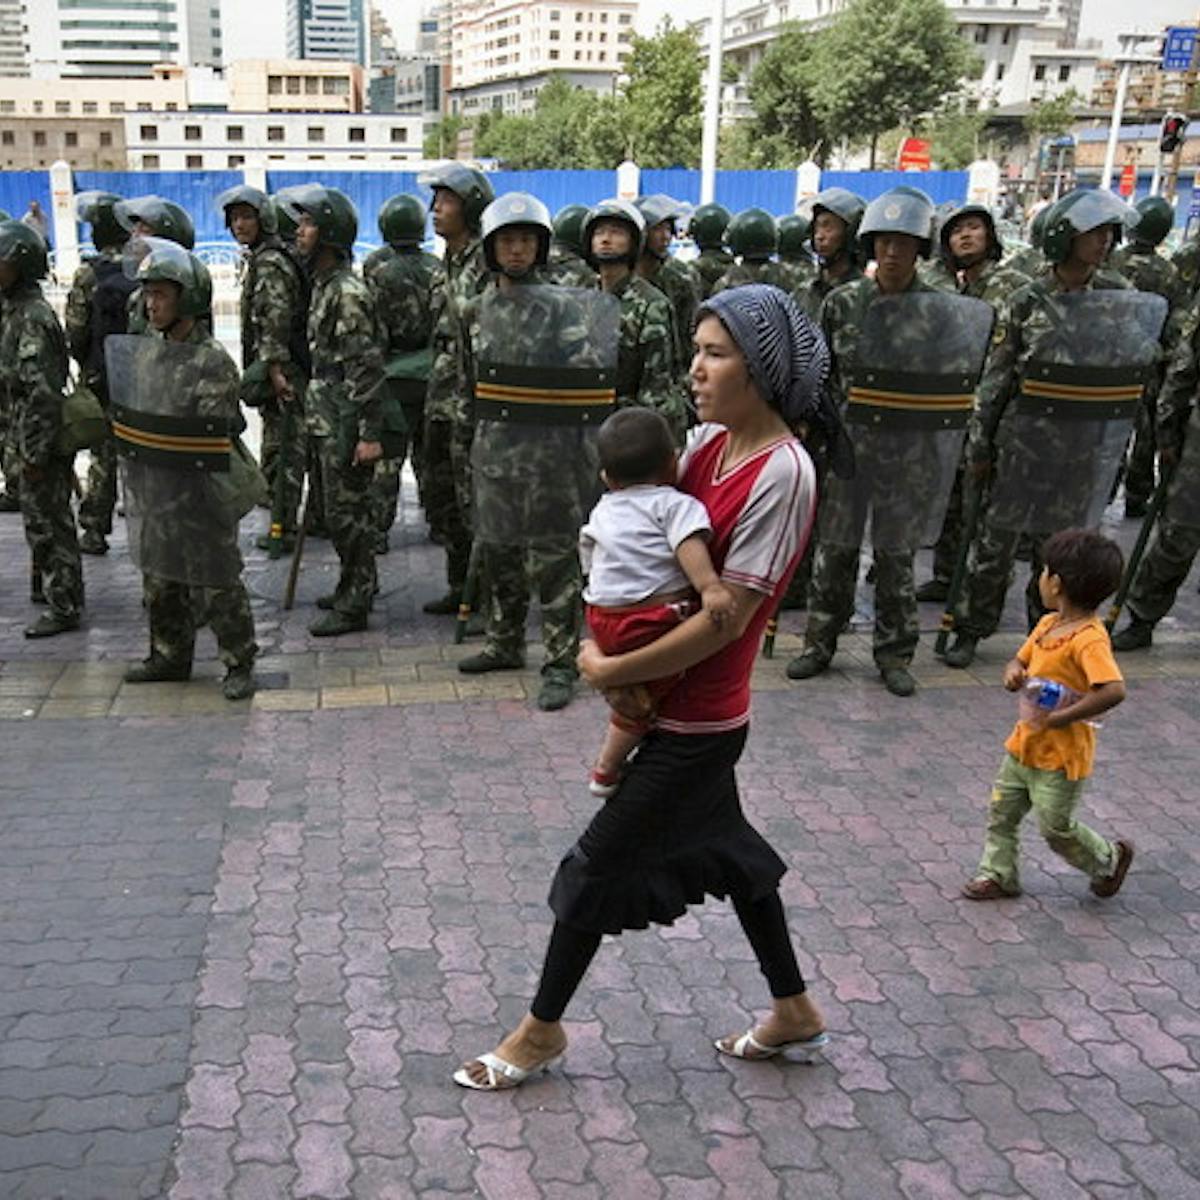 China's Uighur Muslims are trapped in a cycle of violence